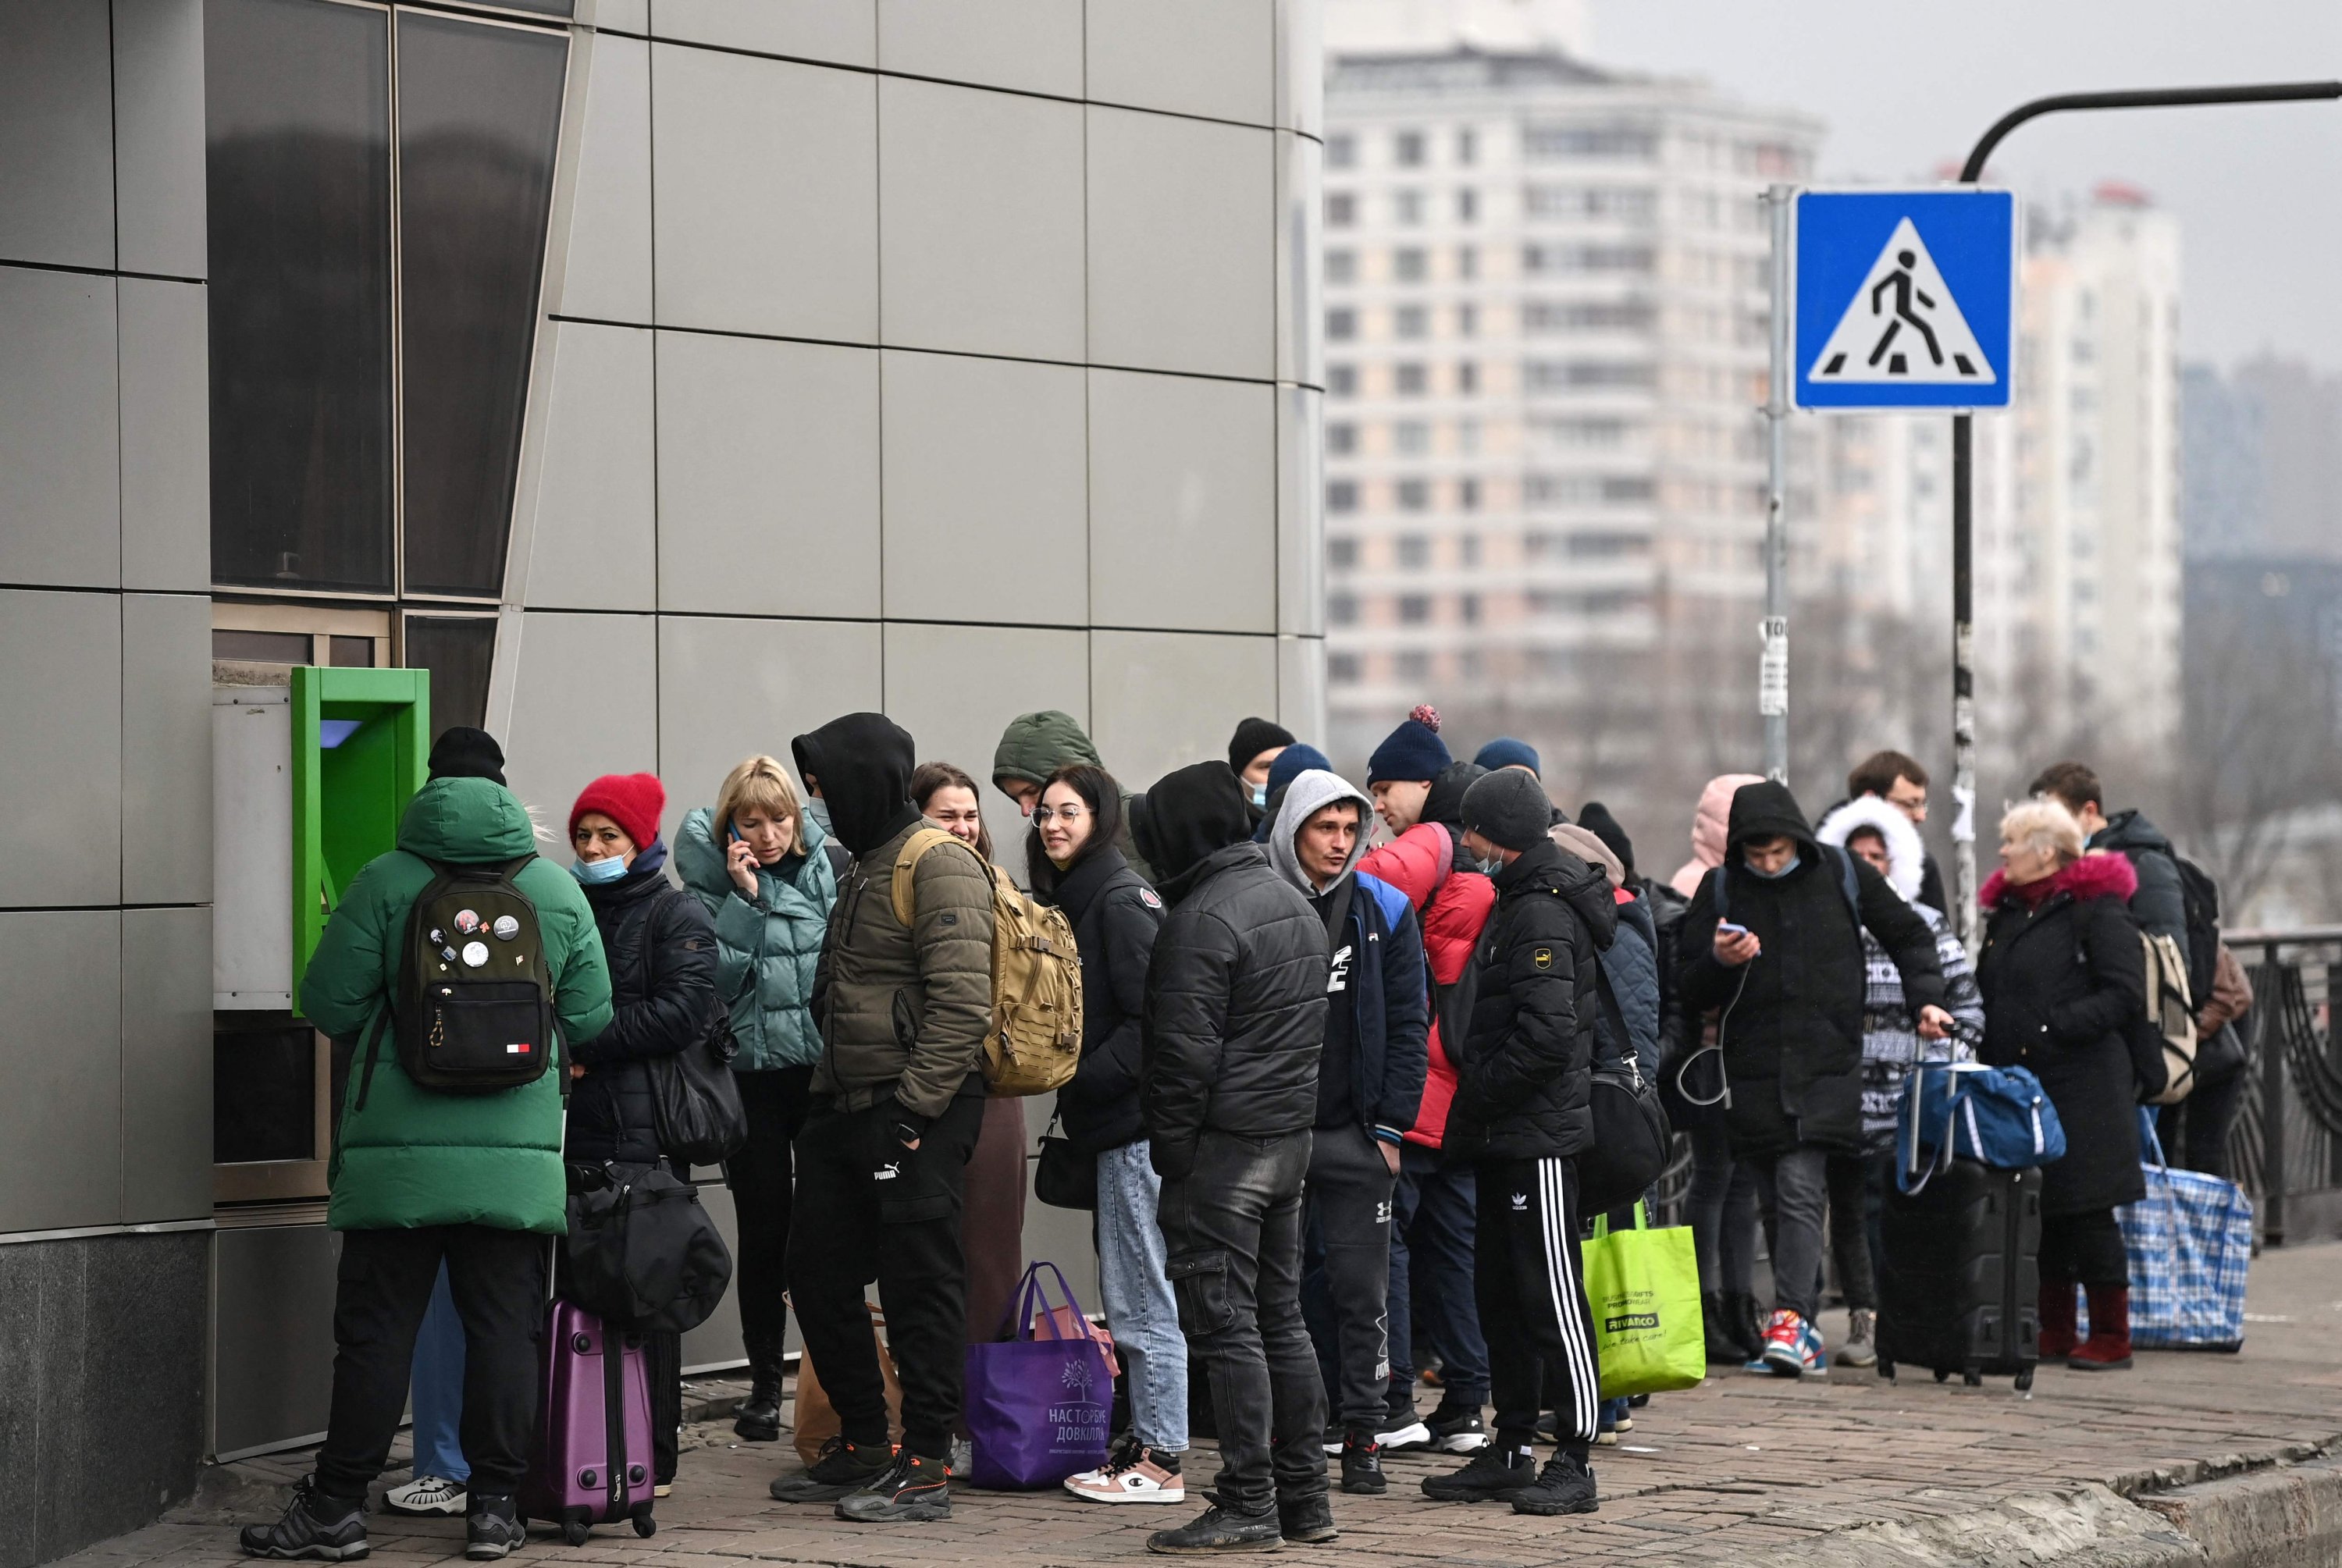 People line up to withdraw money at an ATM in Kyiv, Ukraine, on the morning of Feb. 24, 2022. (AFP Photo)